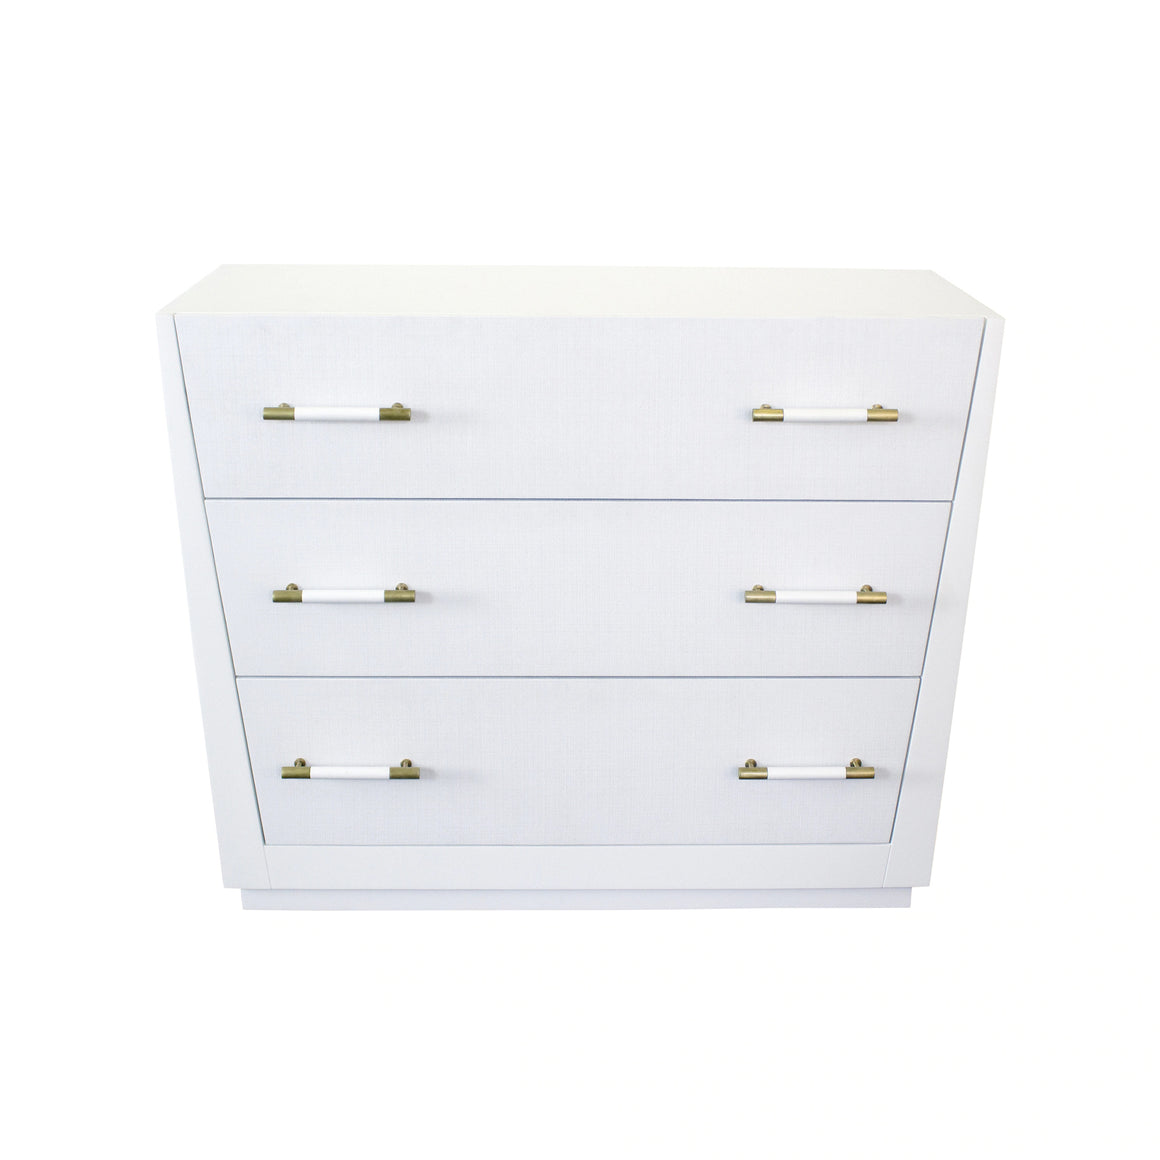 Worlds Away Liam 3 Drawer Chest - White Lacquer